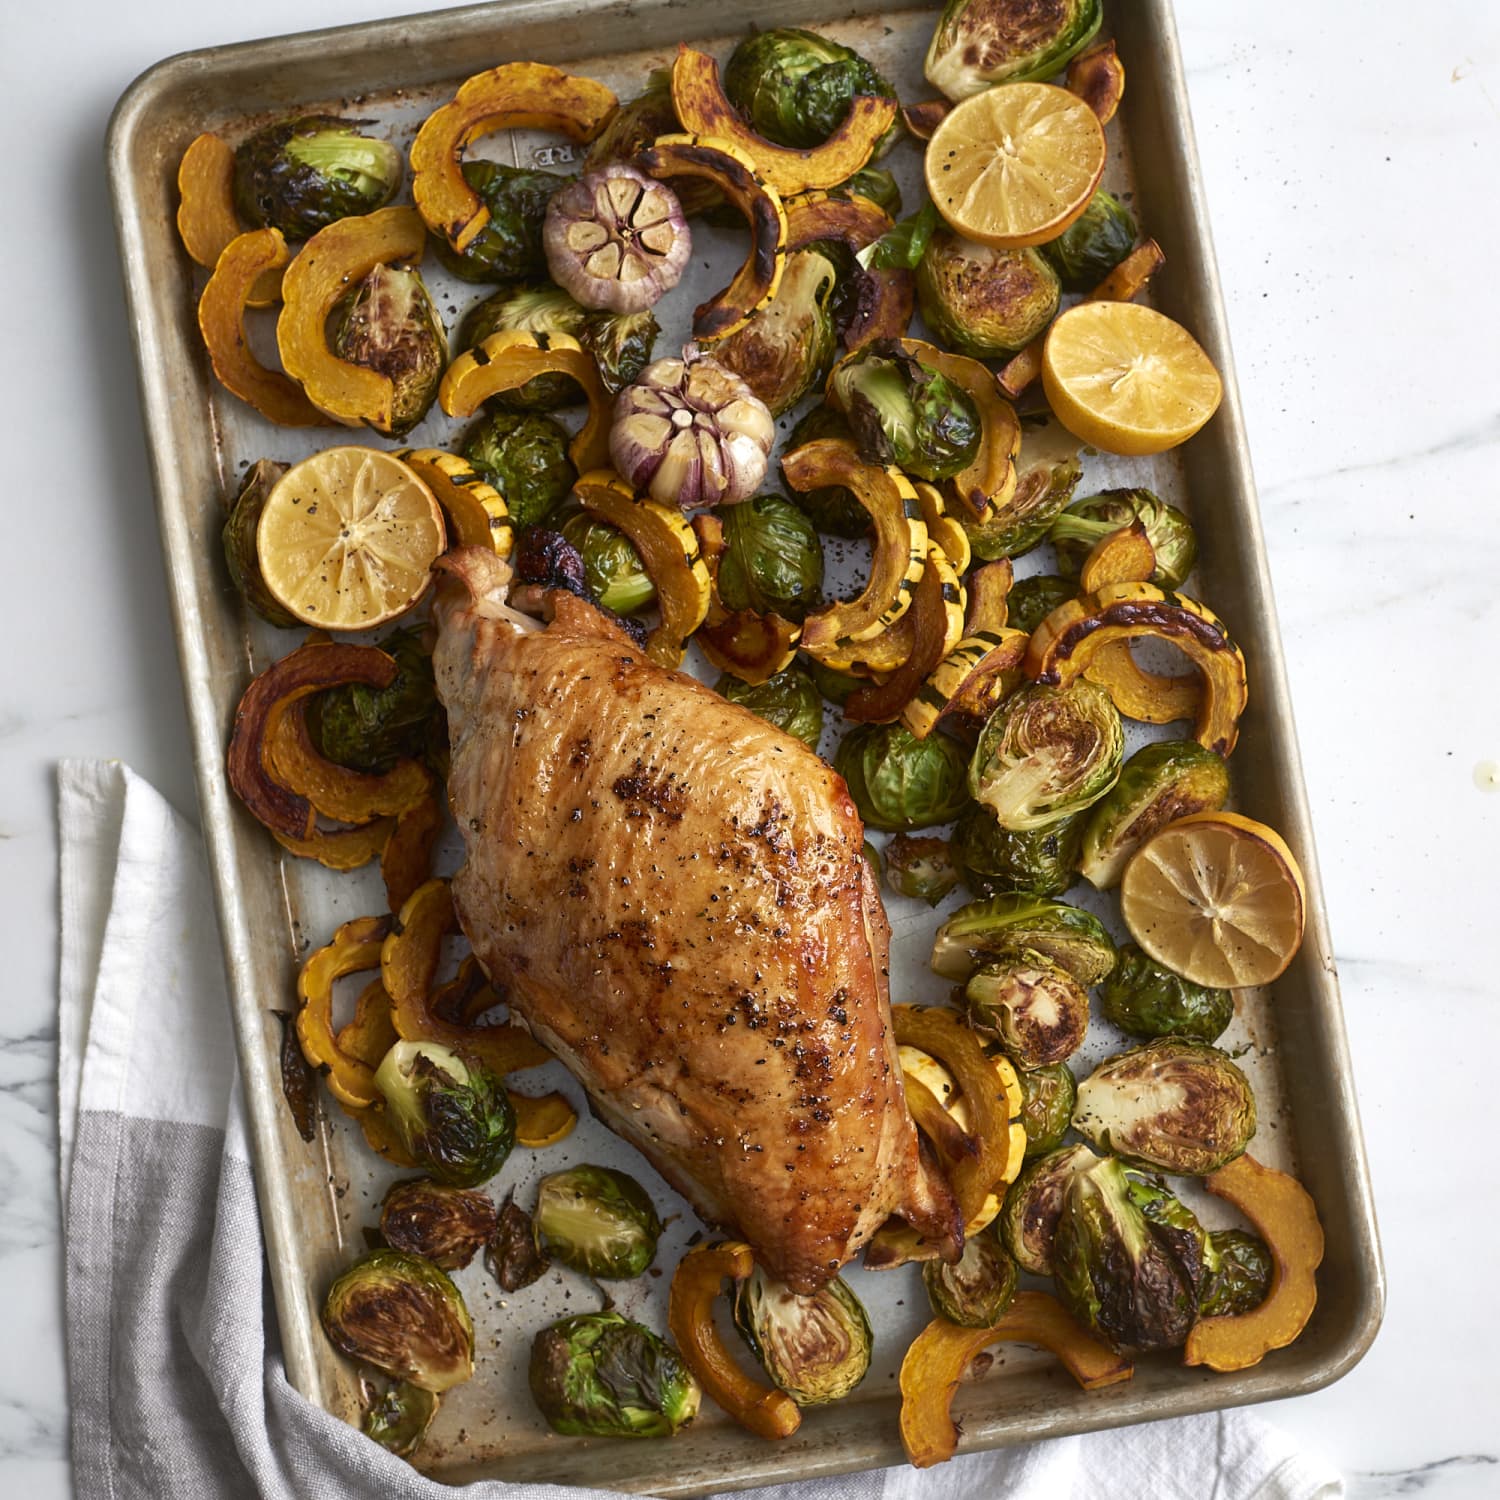 Epicure - ✨ Sheet Pan Turkey, Crispy Brussels Sprouts & Squash ✨  Ingredients 1 1⁄2 lbs (675 g) turkey breasts, about 3 or 4 1 tbsp oil 4  tbsp Holiday Seasoning, divided